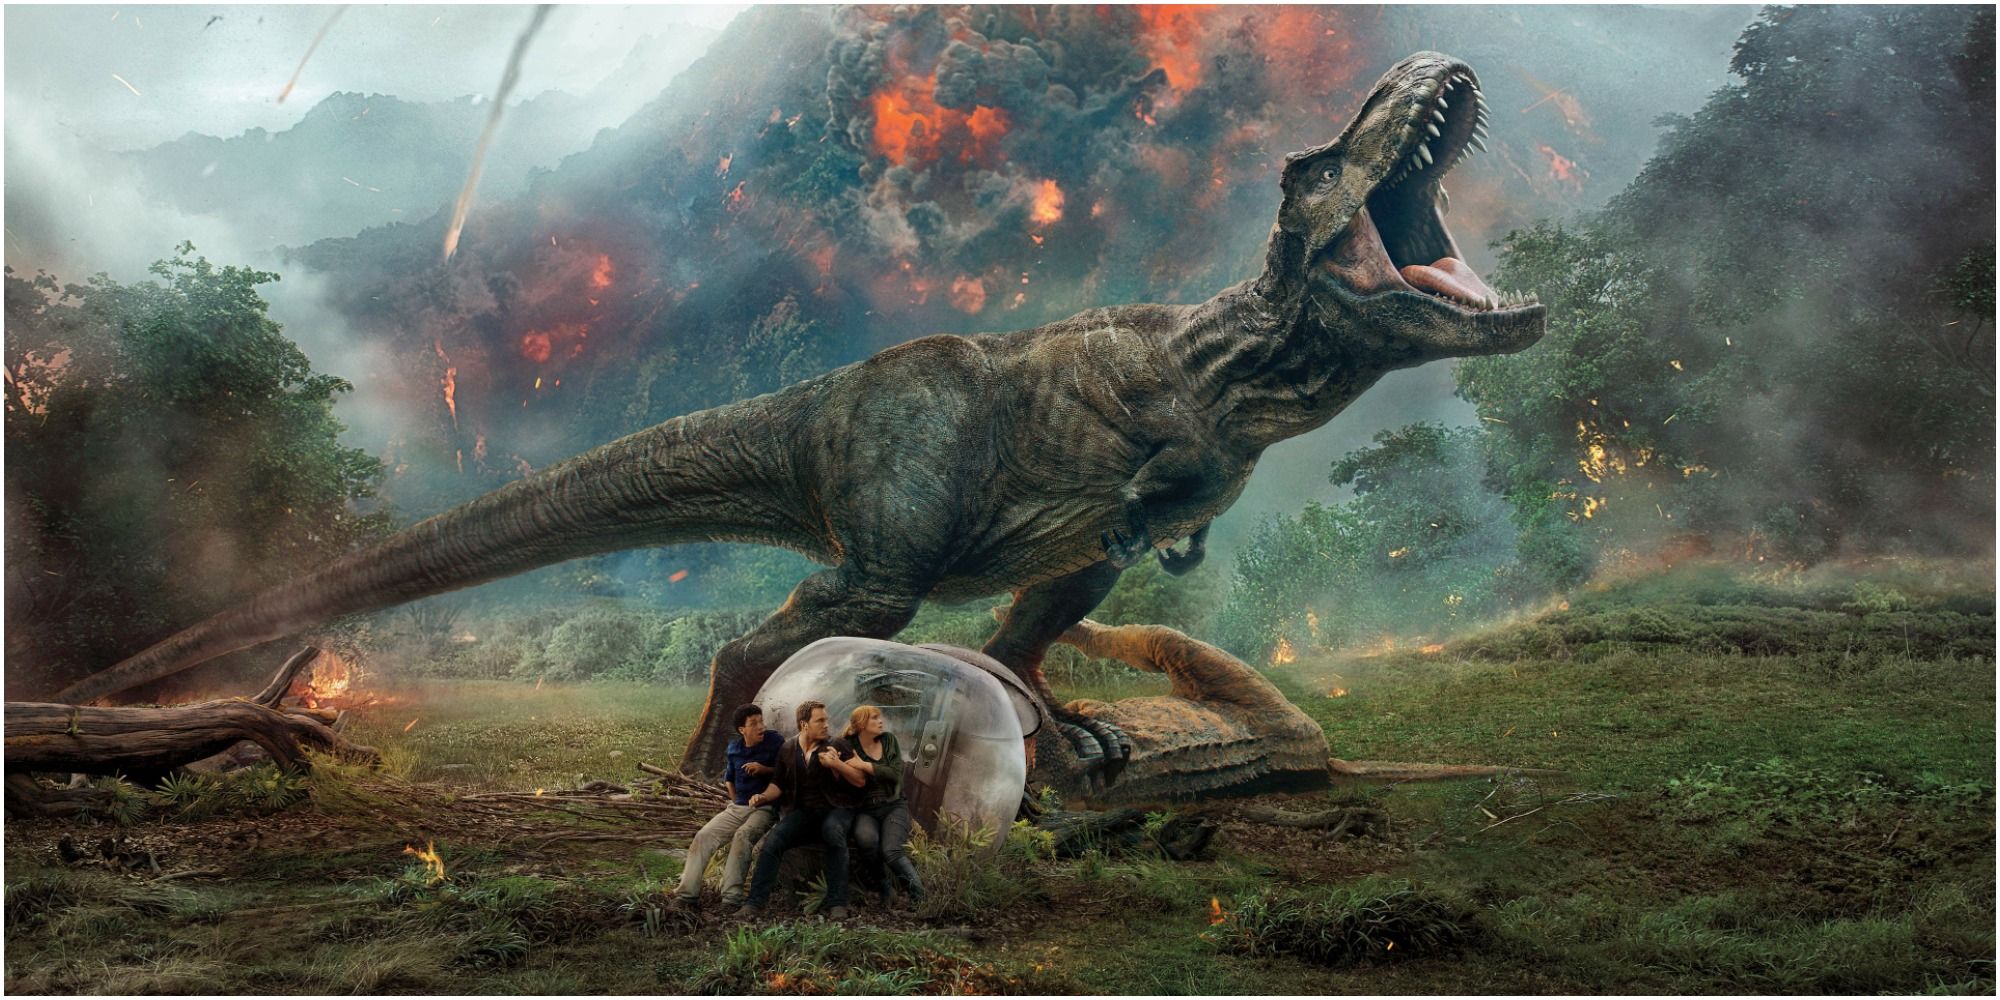 Jurassic World 3 10 Mistakes From Fallen Kingdom That Dominion Needs To Avoid